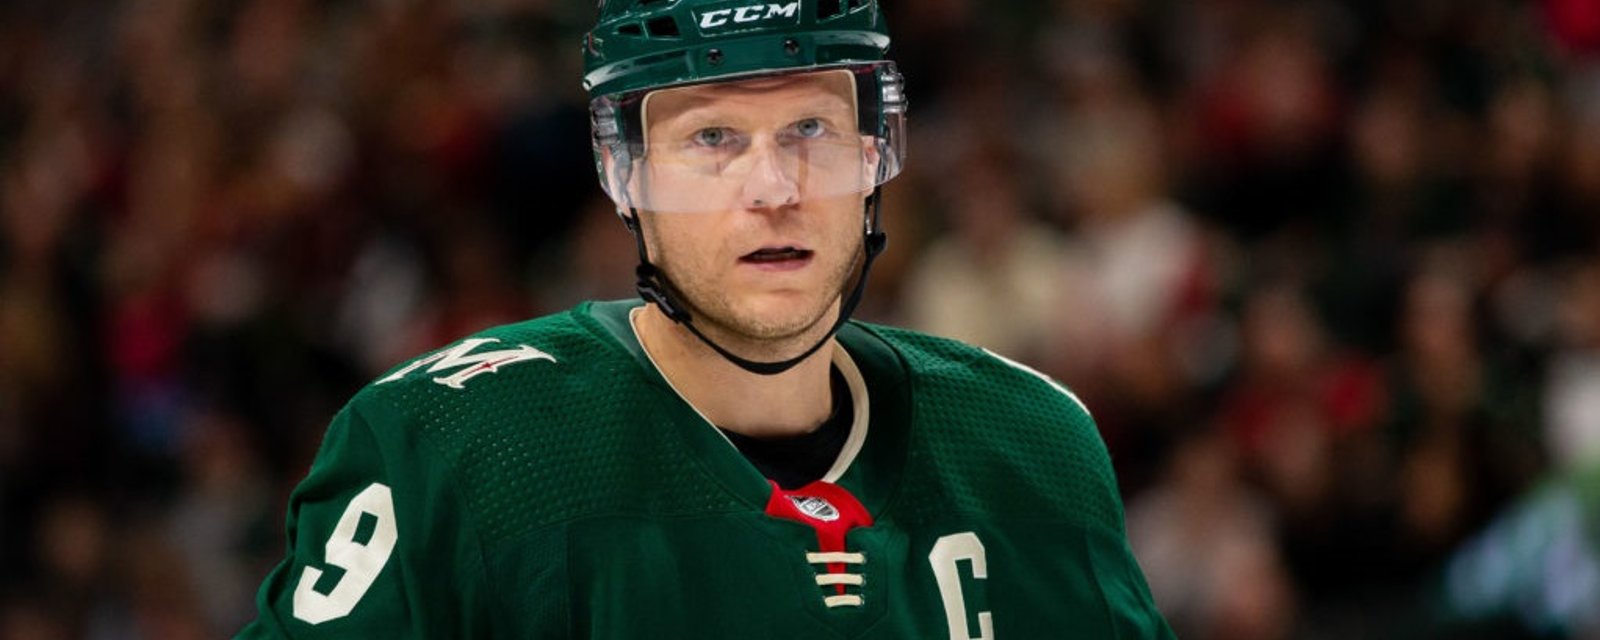 Mikko Koivu may have played his last NHL game.